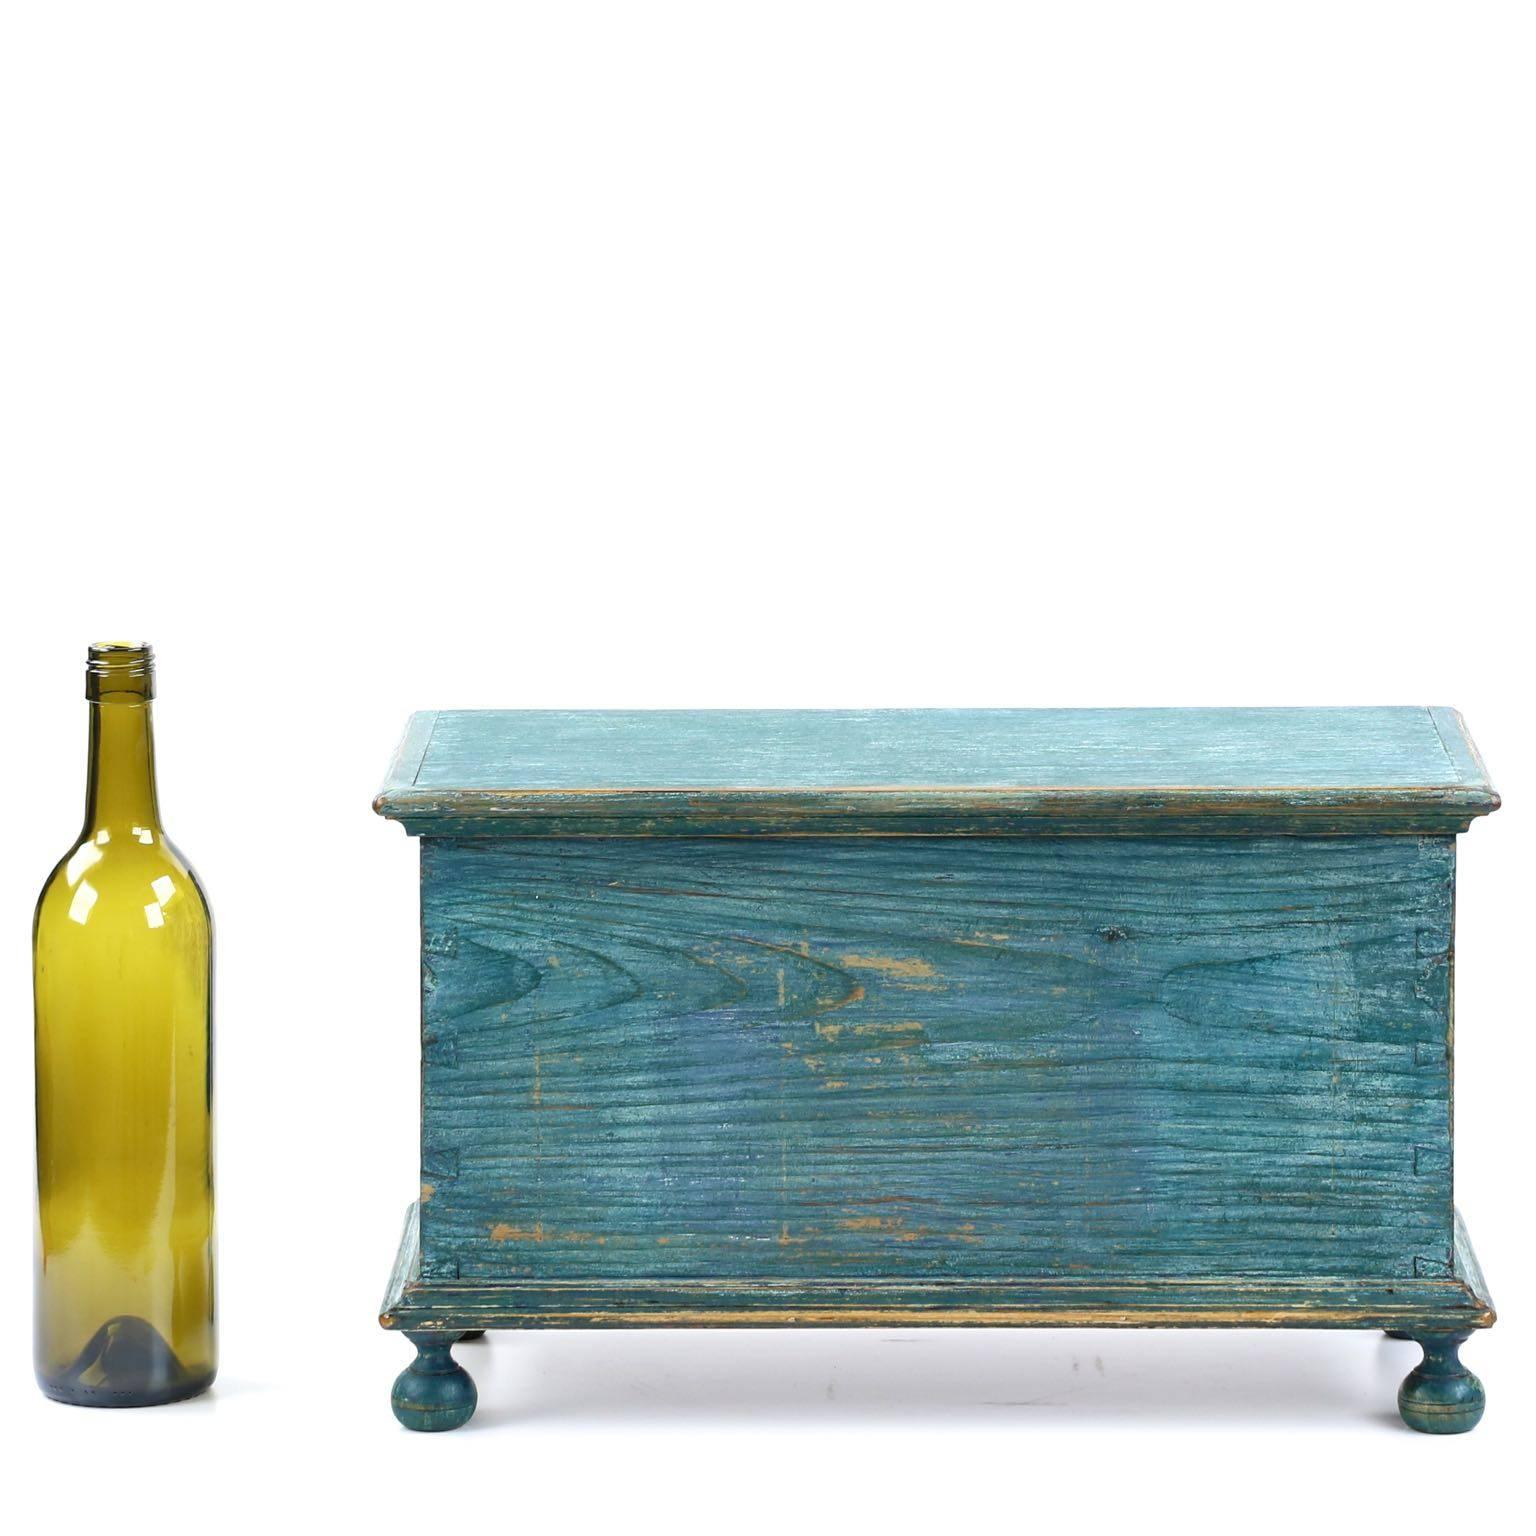 An absolutely stunning and entirely original miniature chest, this precious piece retains a very early and vibrant blue painted surface and is untouched other than replaced brass hinges and remnants of later paint.  Clearly a work of Southeastern